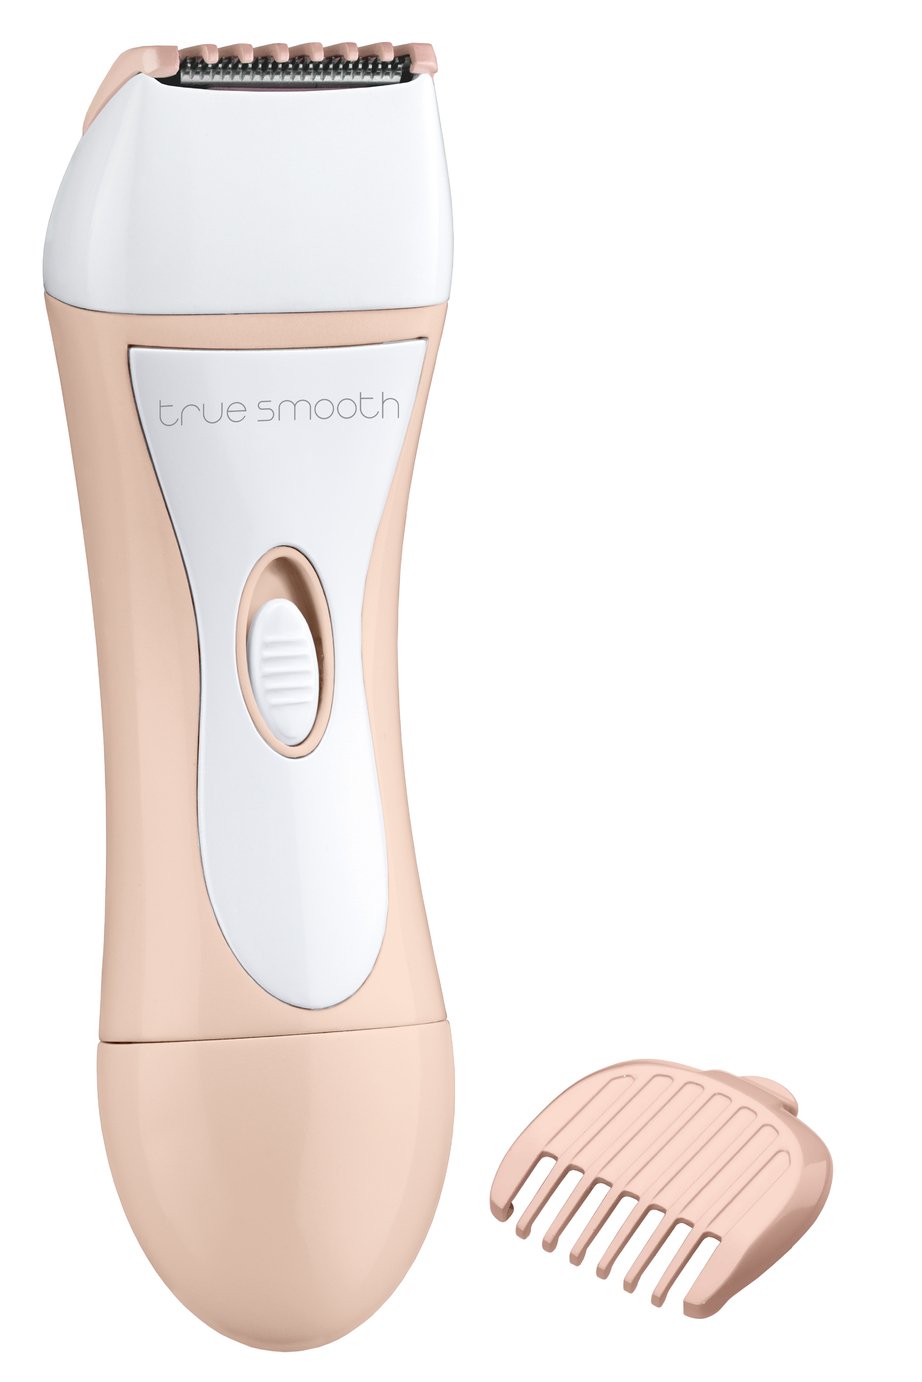 BaByliss TrueSmooth Wet and Dry Bikini Trimmer